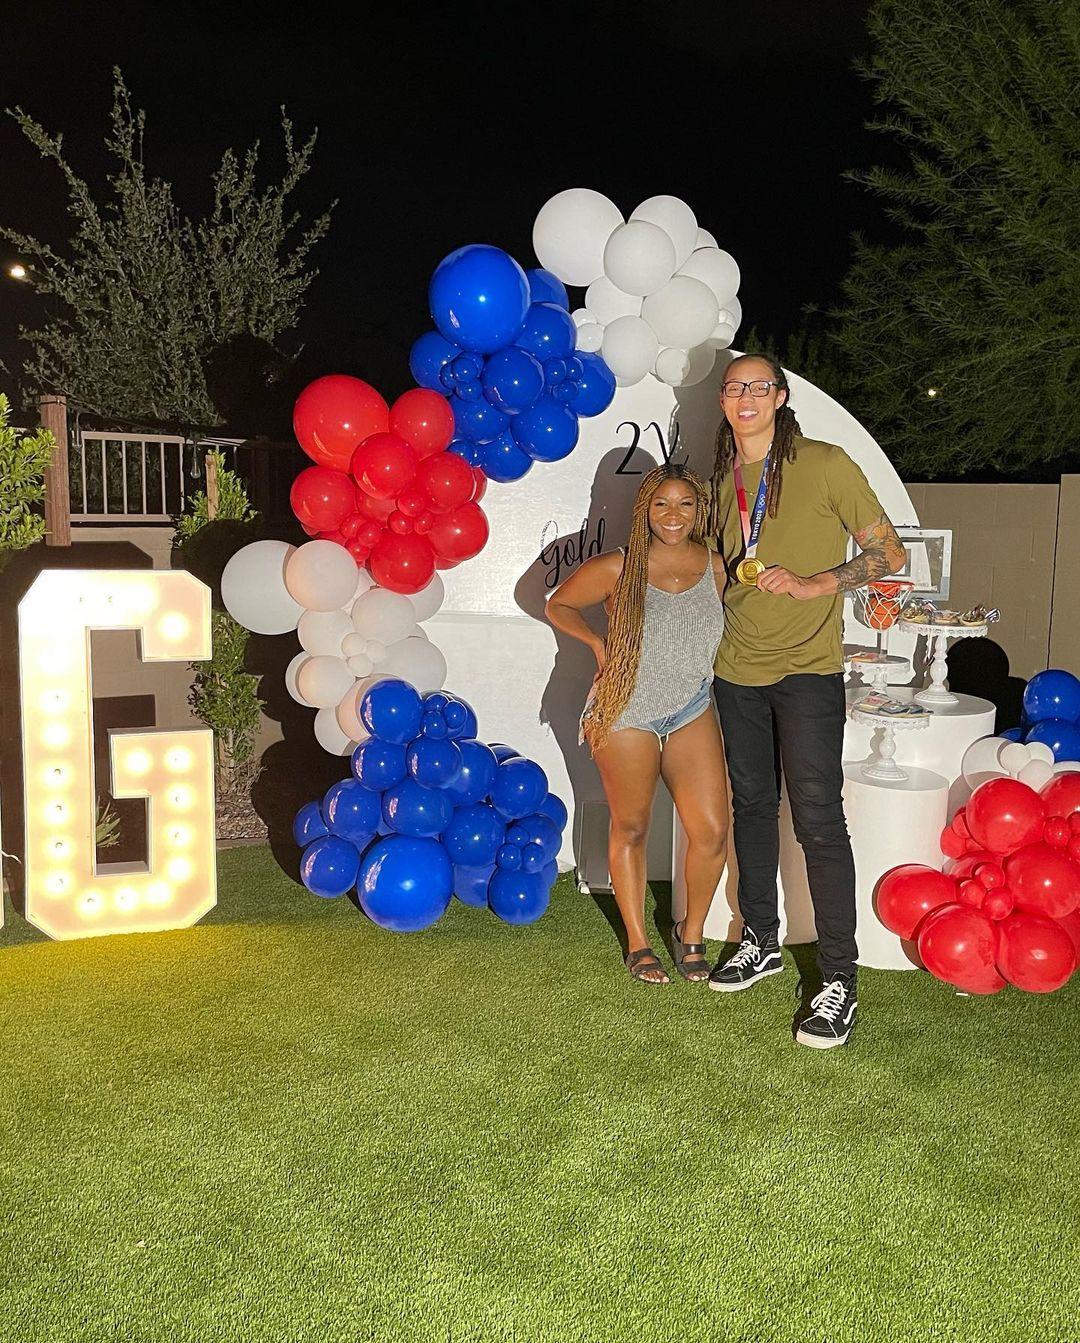 Brittney Griner is back home and wife Cherelle is over the moon